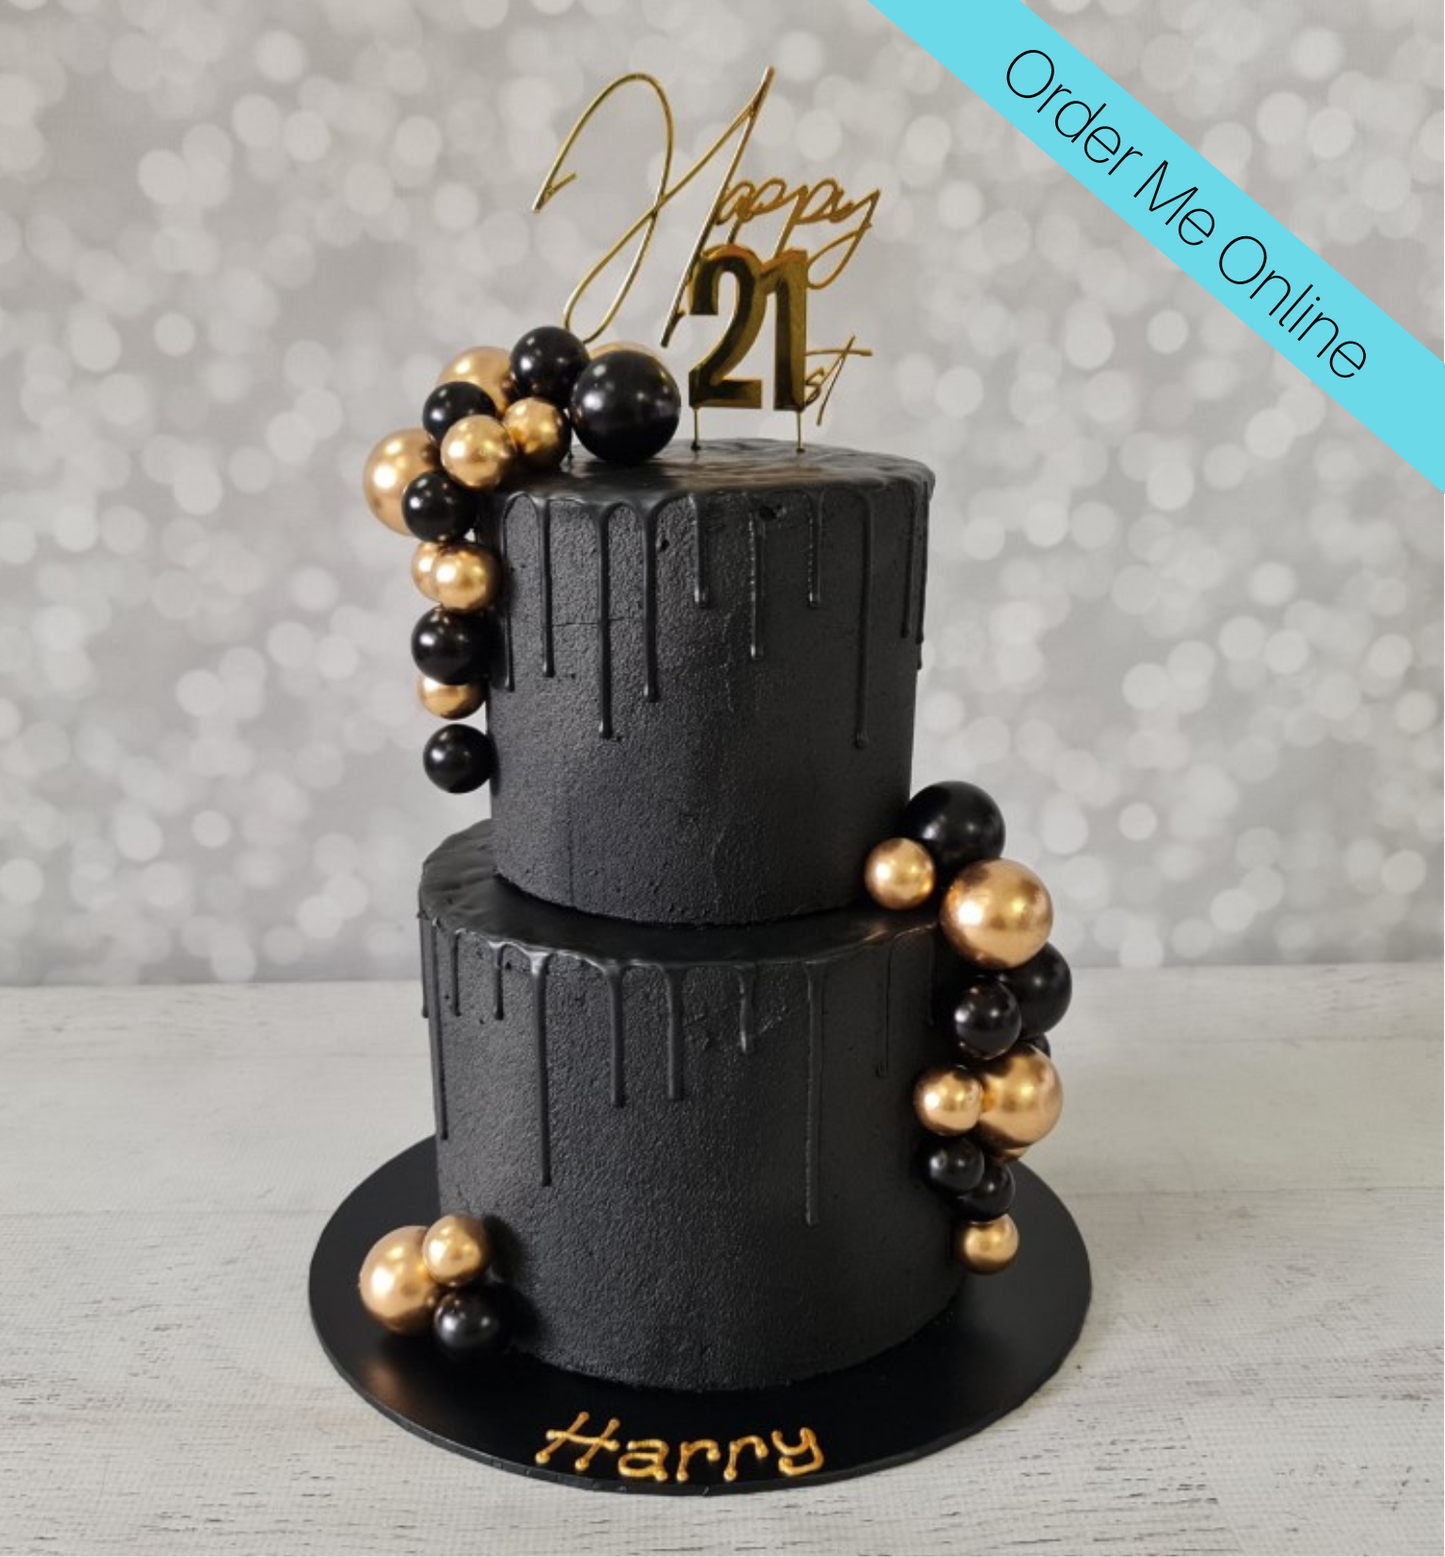 32+ Excellent Photo of 21 Birthday Cakes For Her - birijus.com | 21st  birthday cakes, 21st cake, Cool birthday cakes